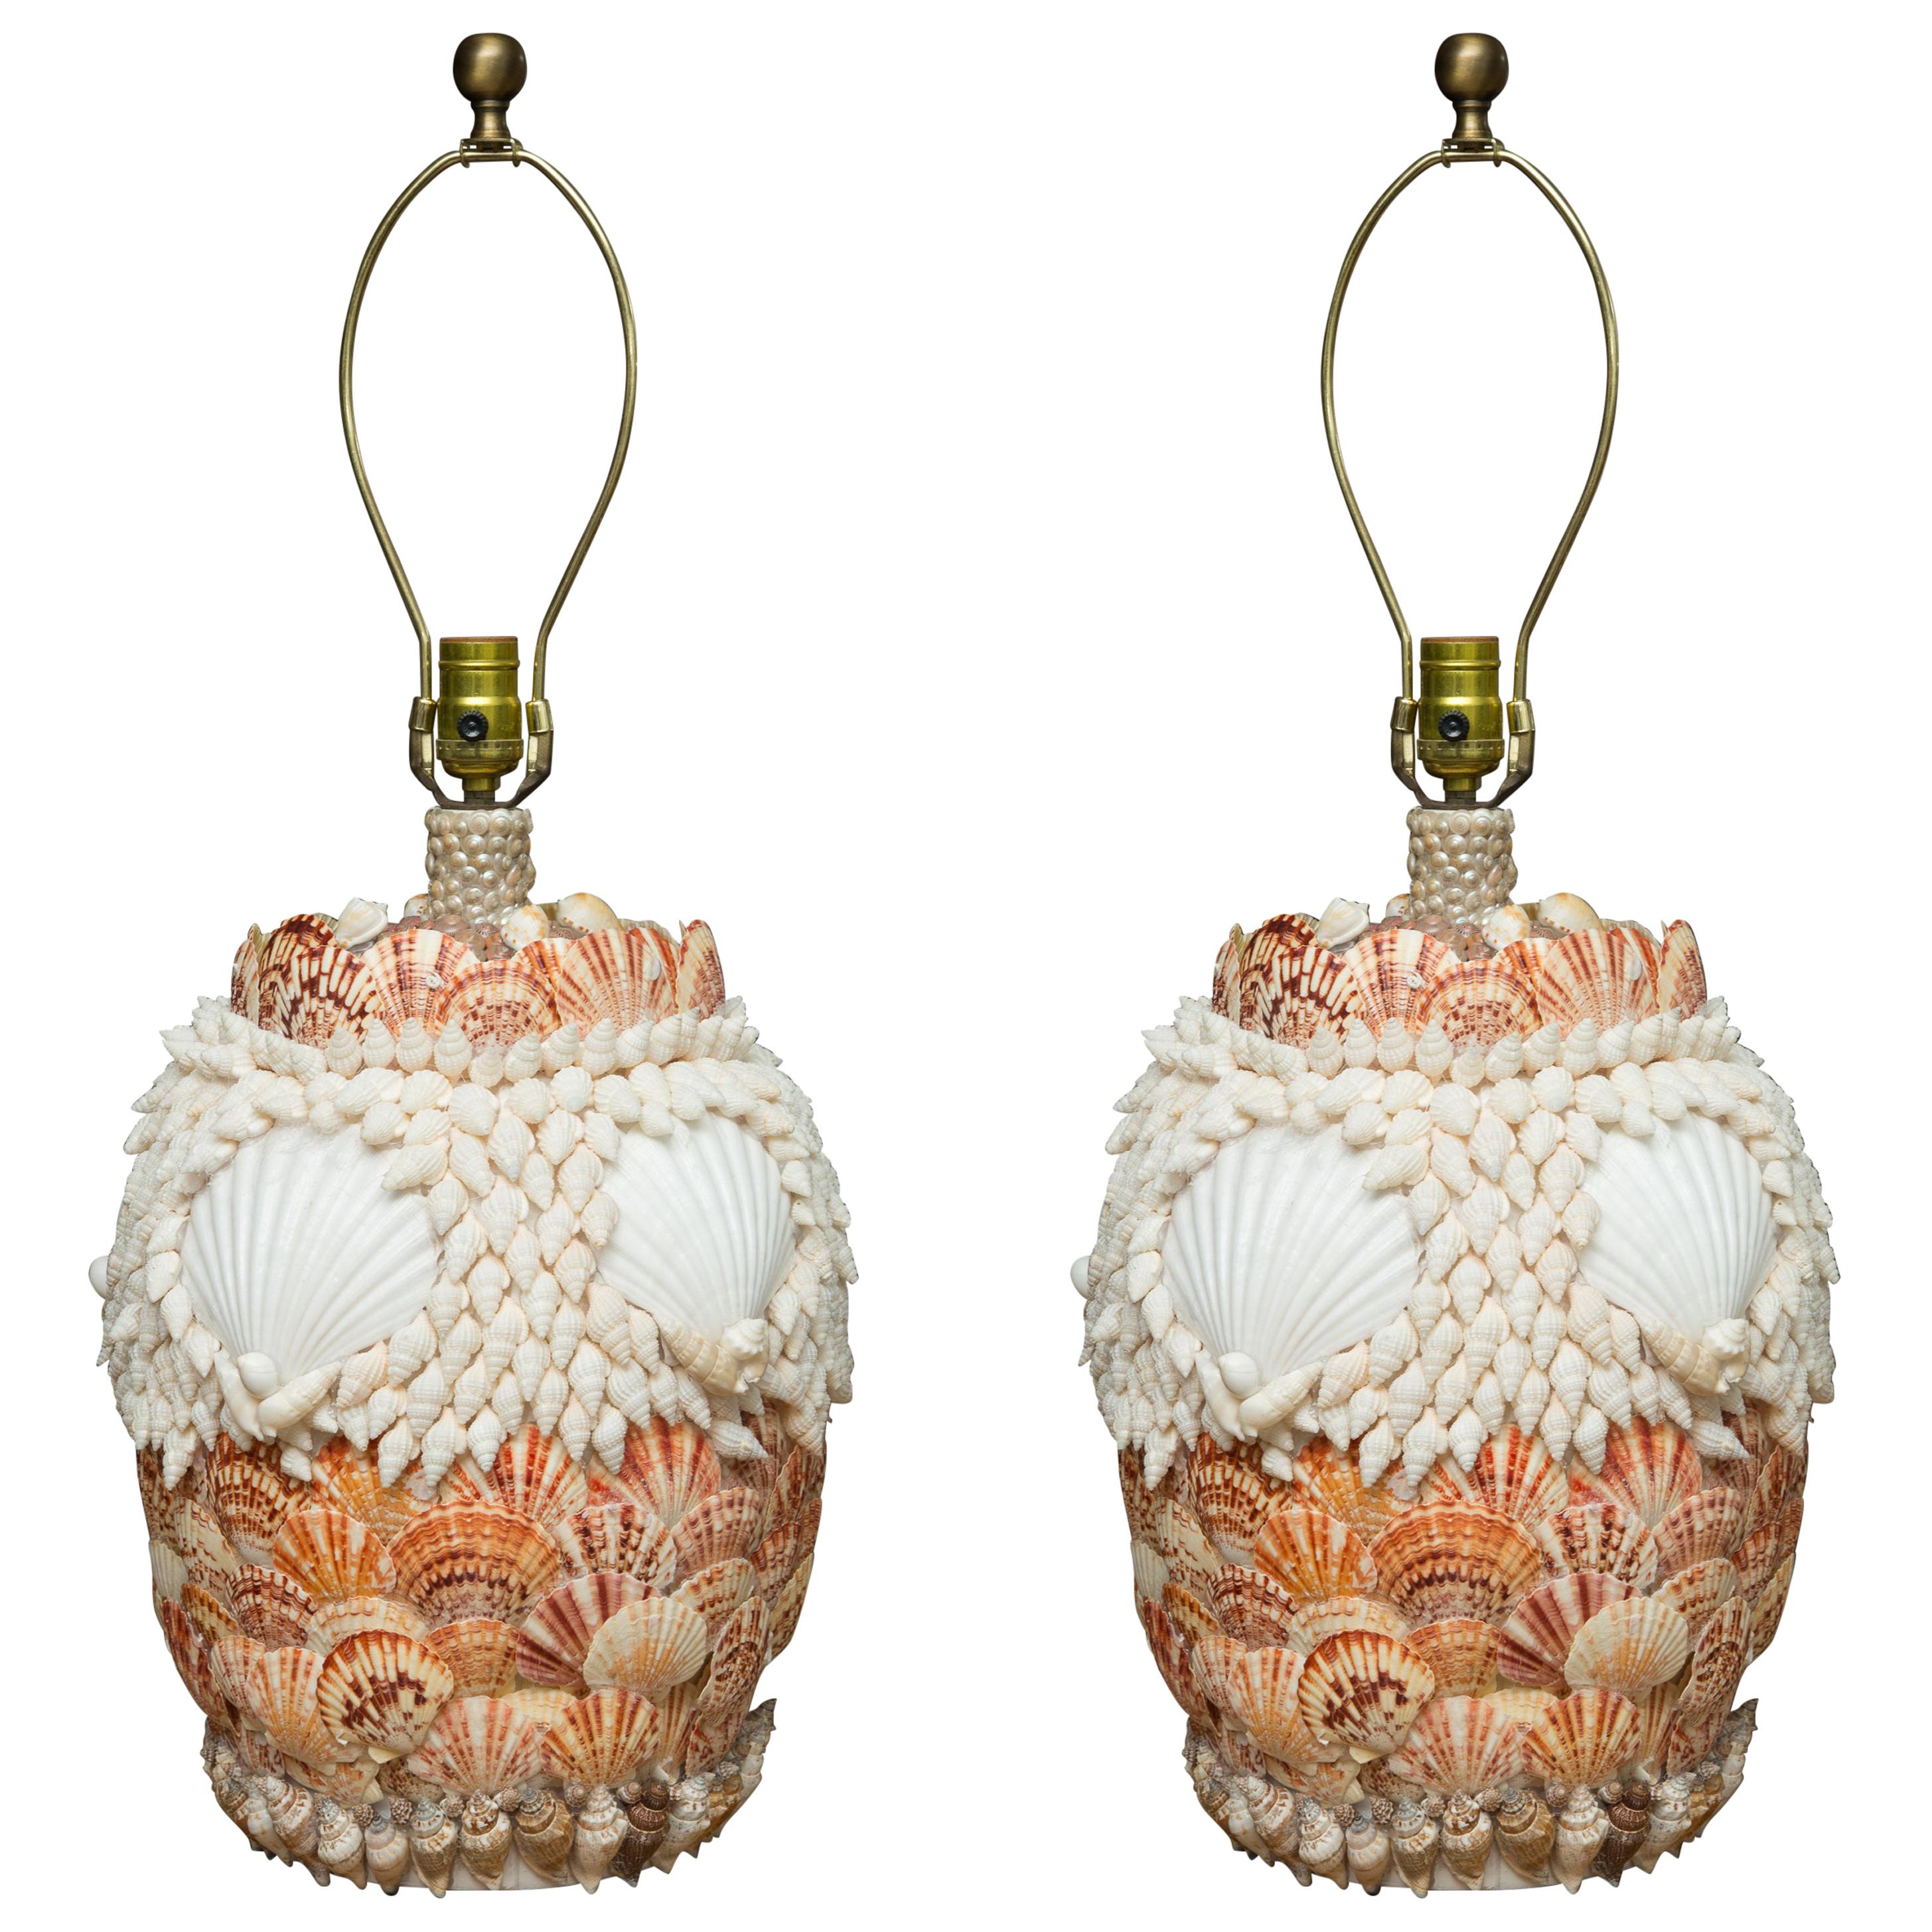 Pair of Shell Encrusted Table Lamps For Sale at 1stDibs